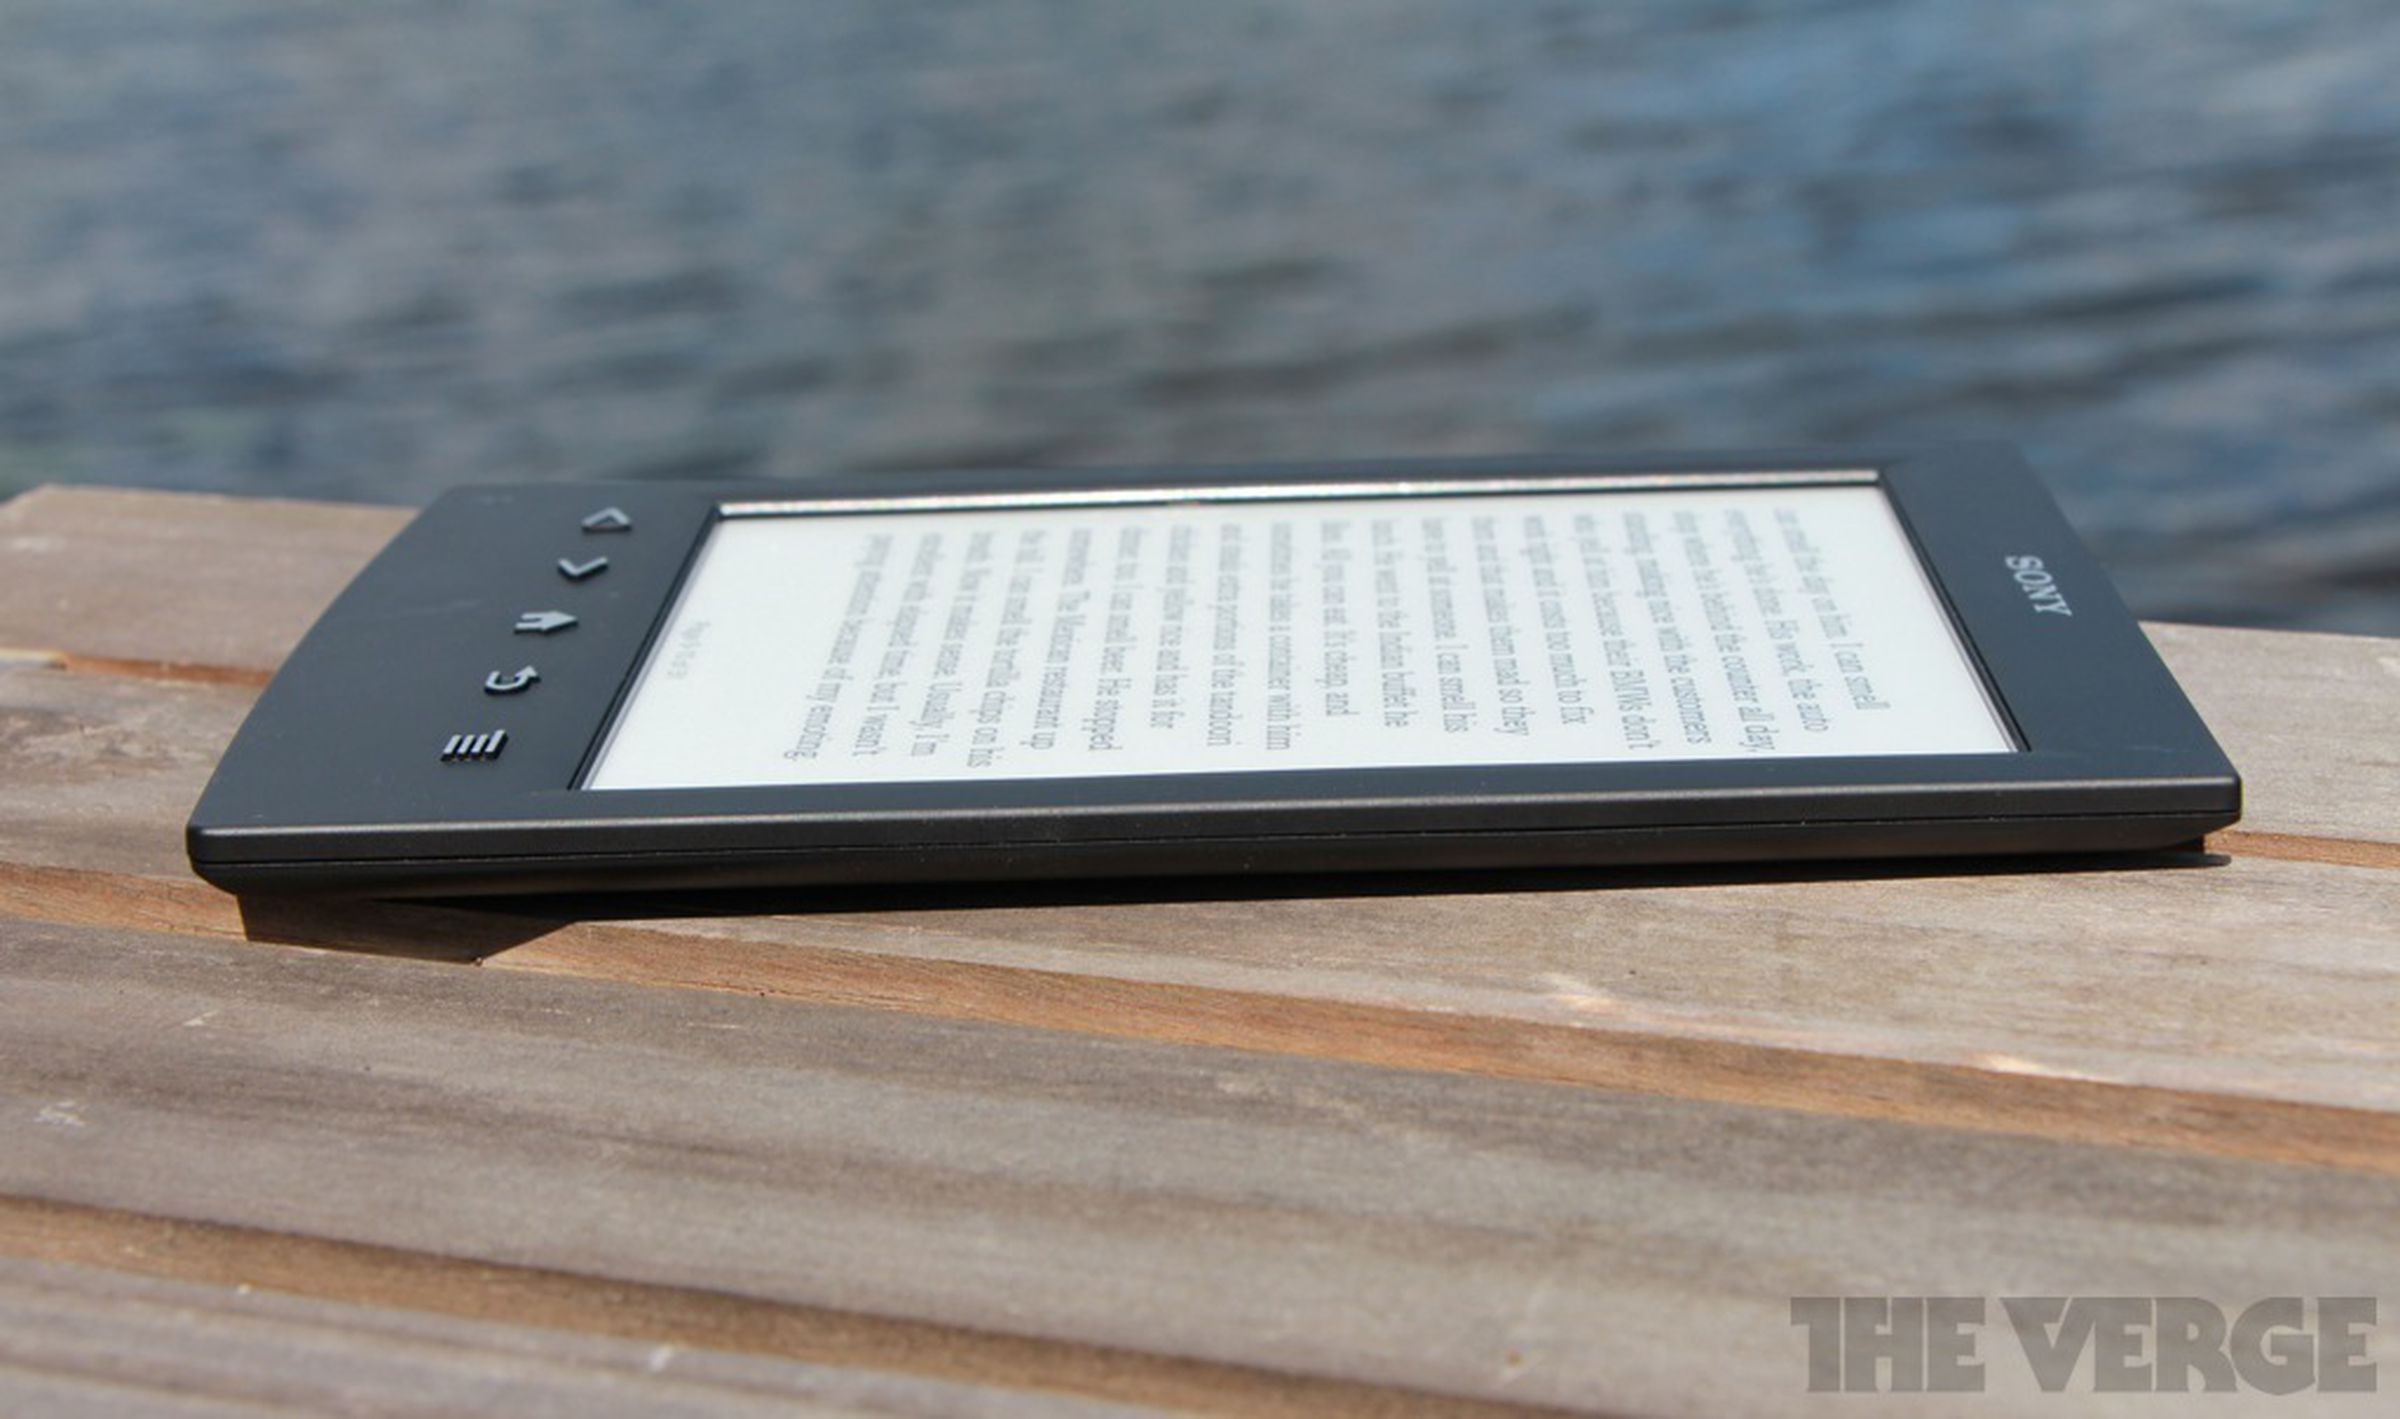 Sony Reader PRS-T2 pictures